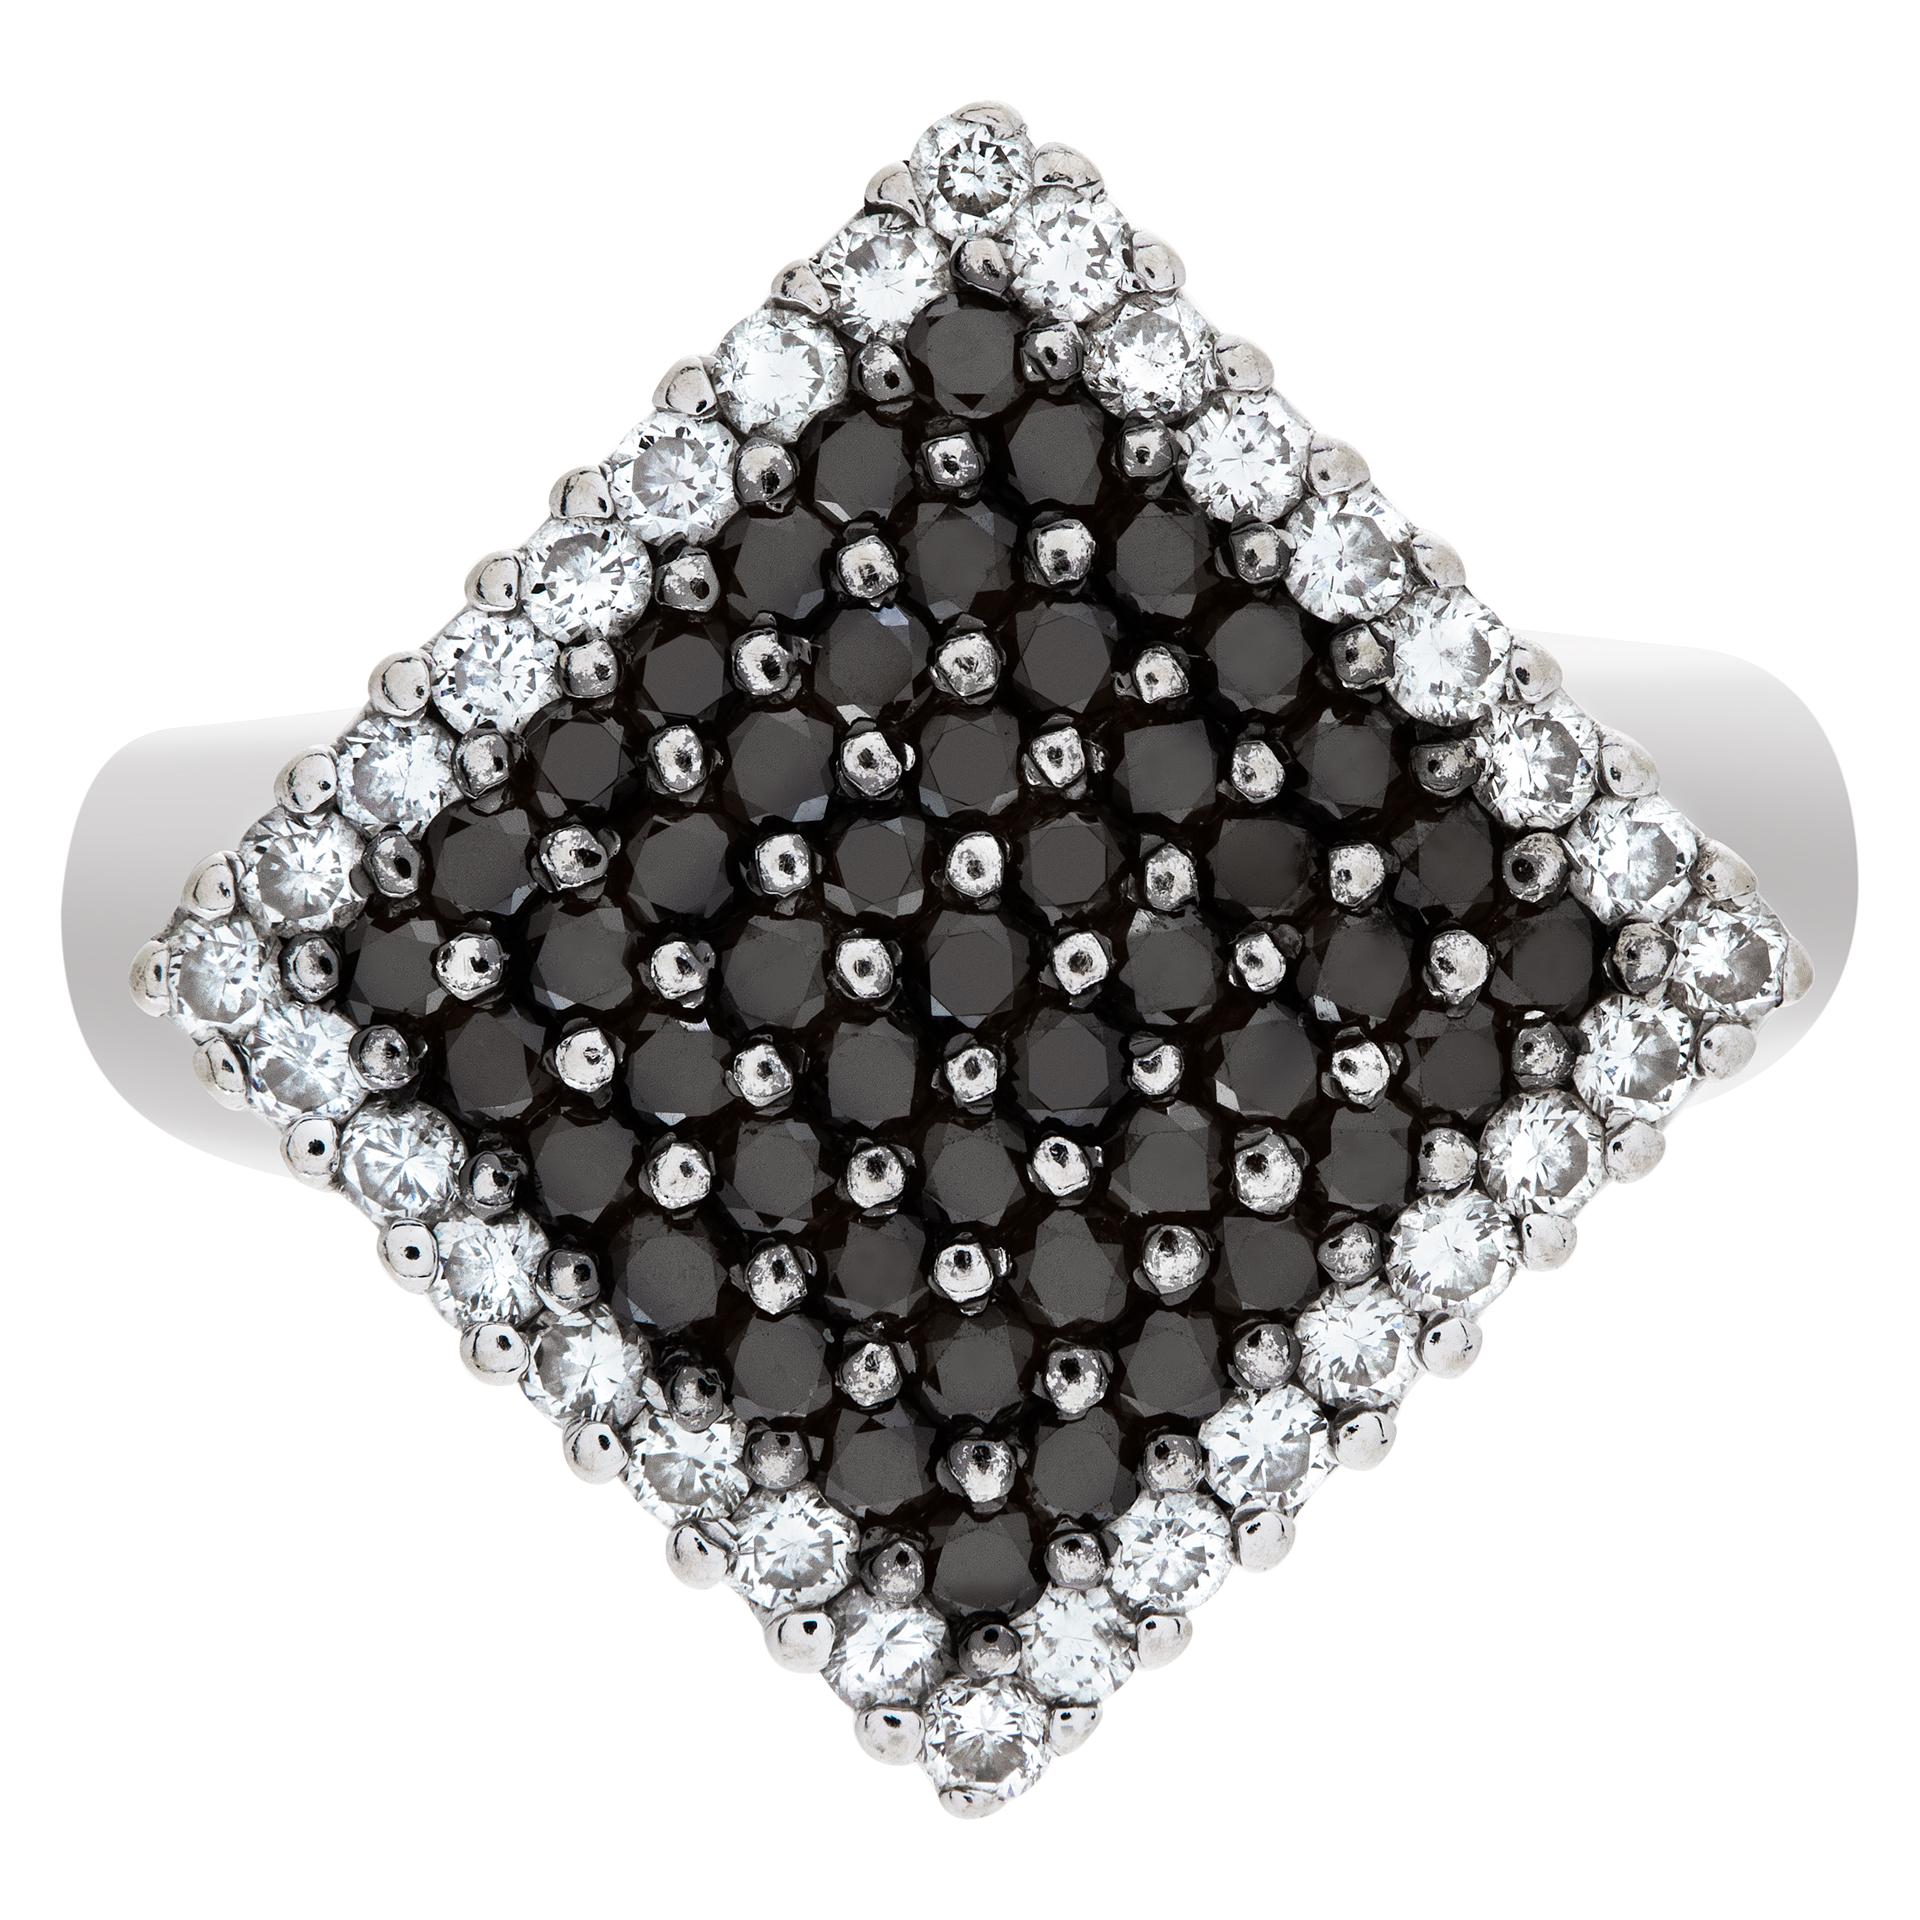 Diamond and black hematite ring in 18k white gold. Size 6.5

This Diamond ring is currently size 6.5 and some items can be sized up or down, please ask! It weighs 5.2 pennyweights and is 18k White Gold.